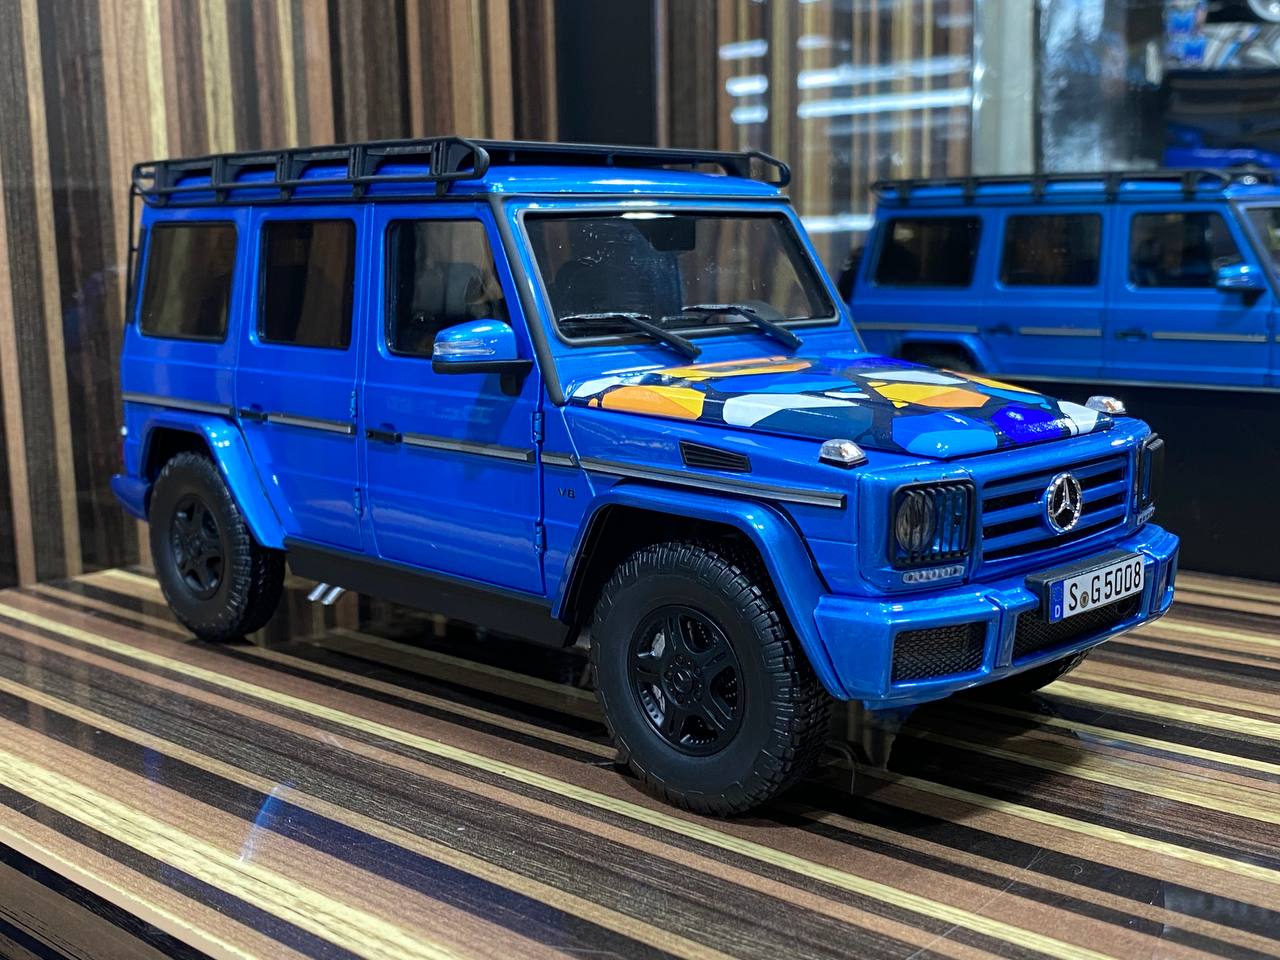 1/18 Diecast Mercedes-Benz G-Class Gventure300k Almost Real Scale Model Car